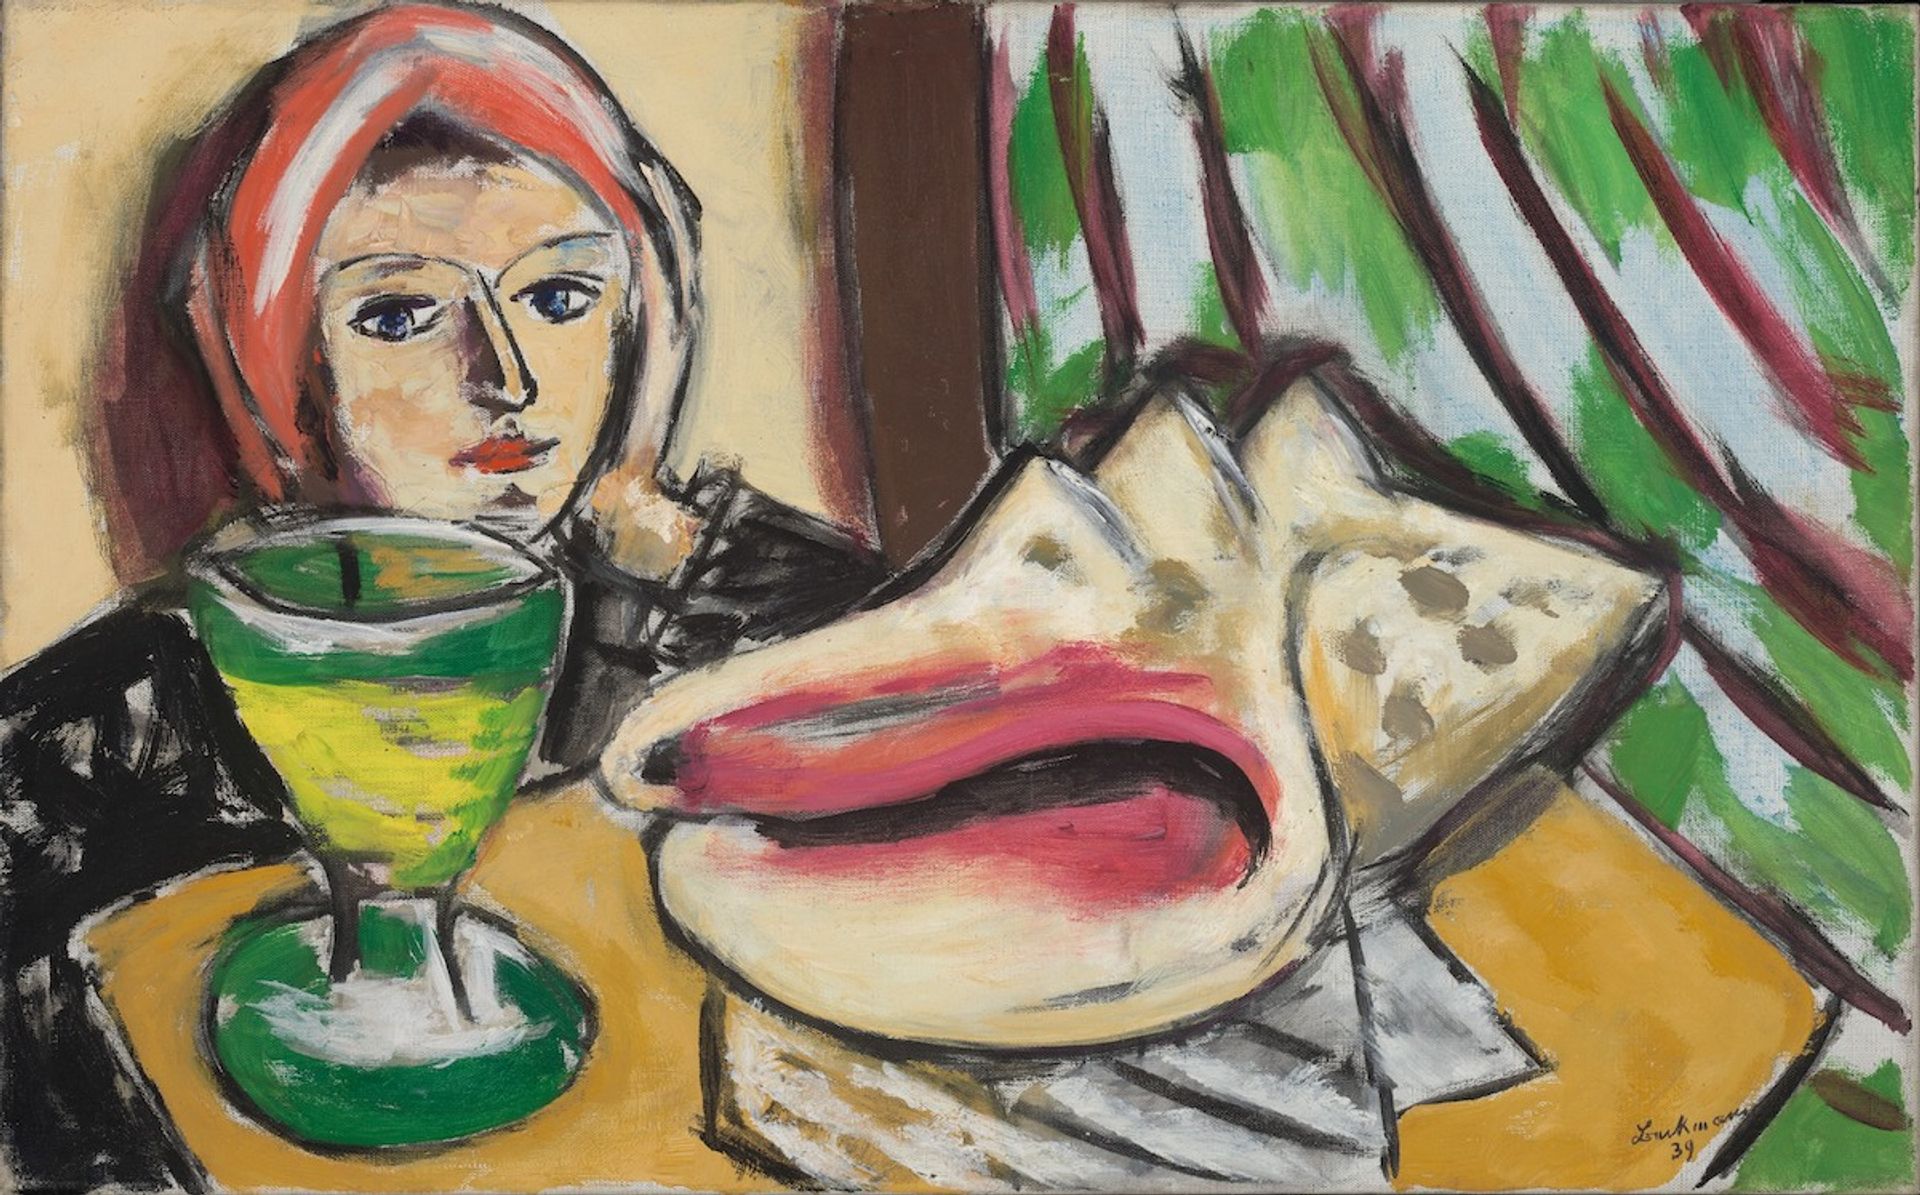 Max Beckmann, Still Life with Large Shell (1939) Courtesy Baltimore Museum of Art. Artists Rights Society (ARS), New York / VG Bild-Kunst, Bonn.